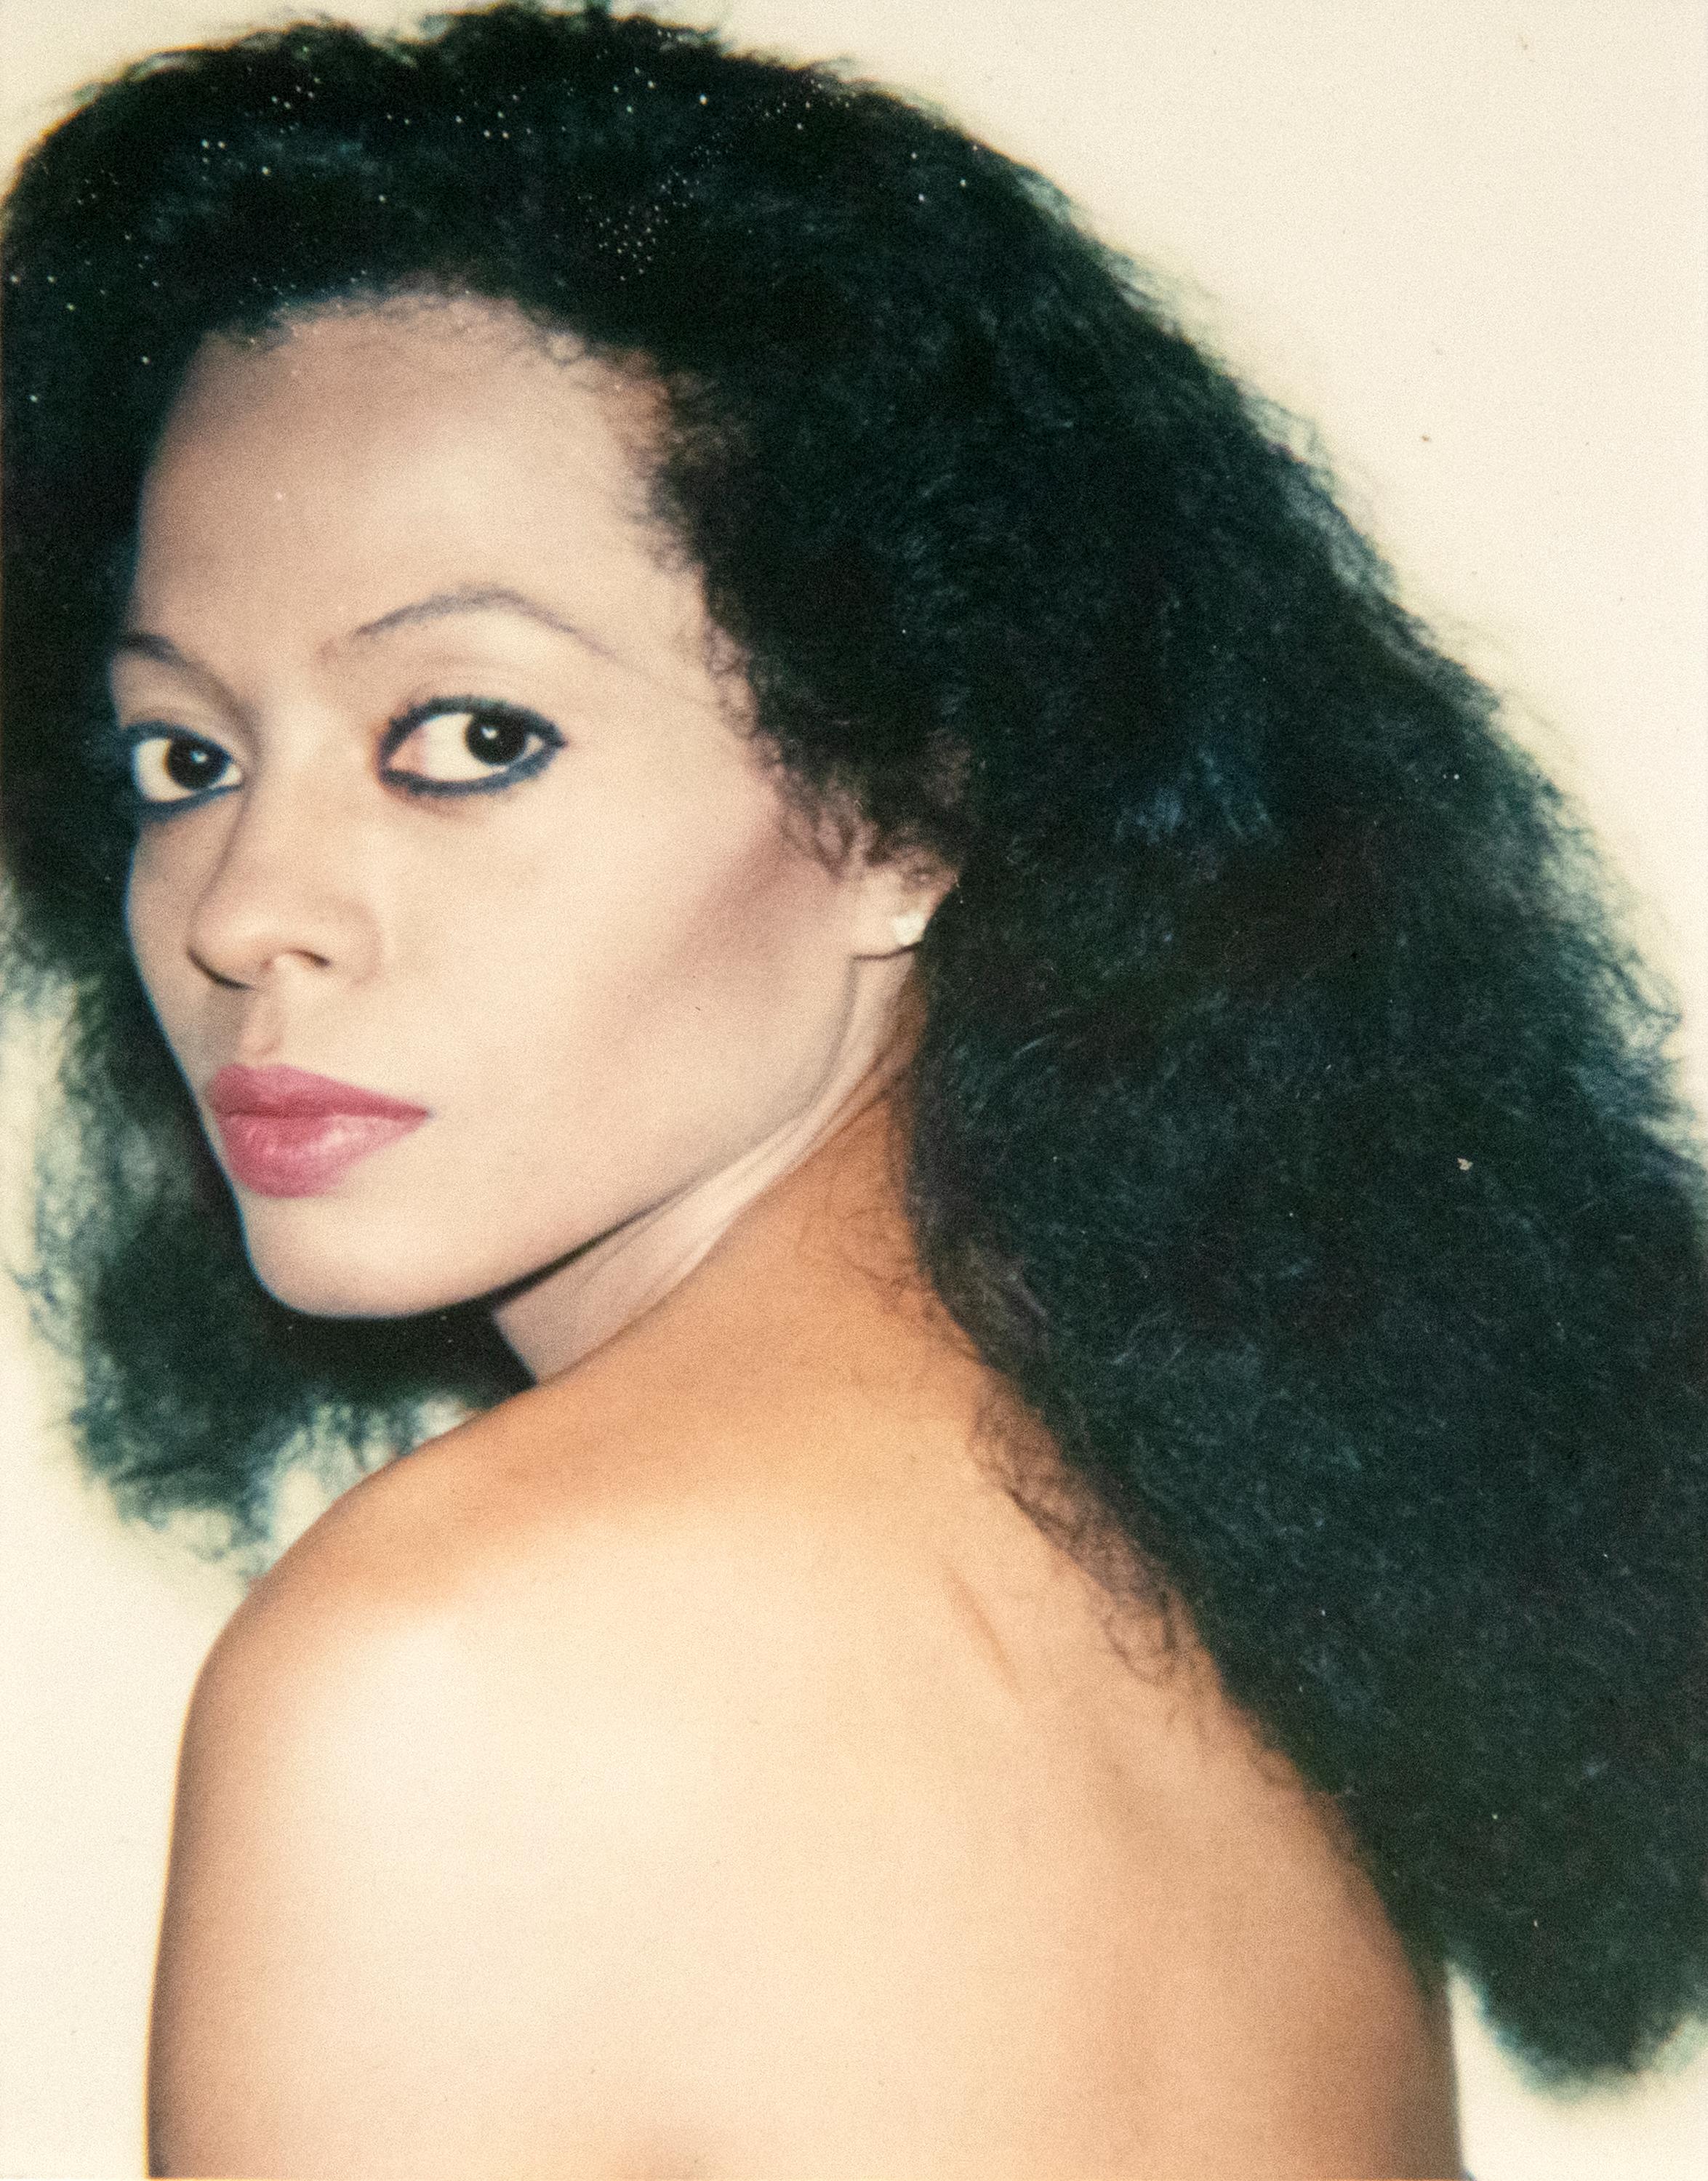 Andy Warhol Portrait Photograph - Diana Ross